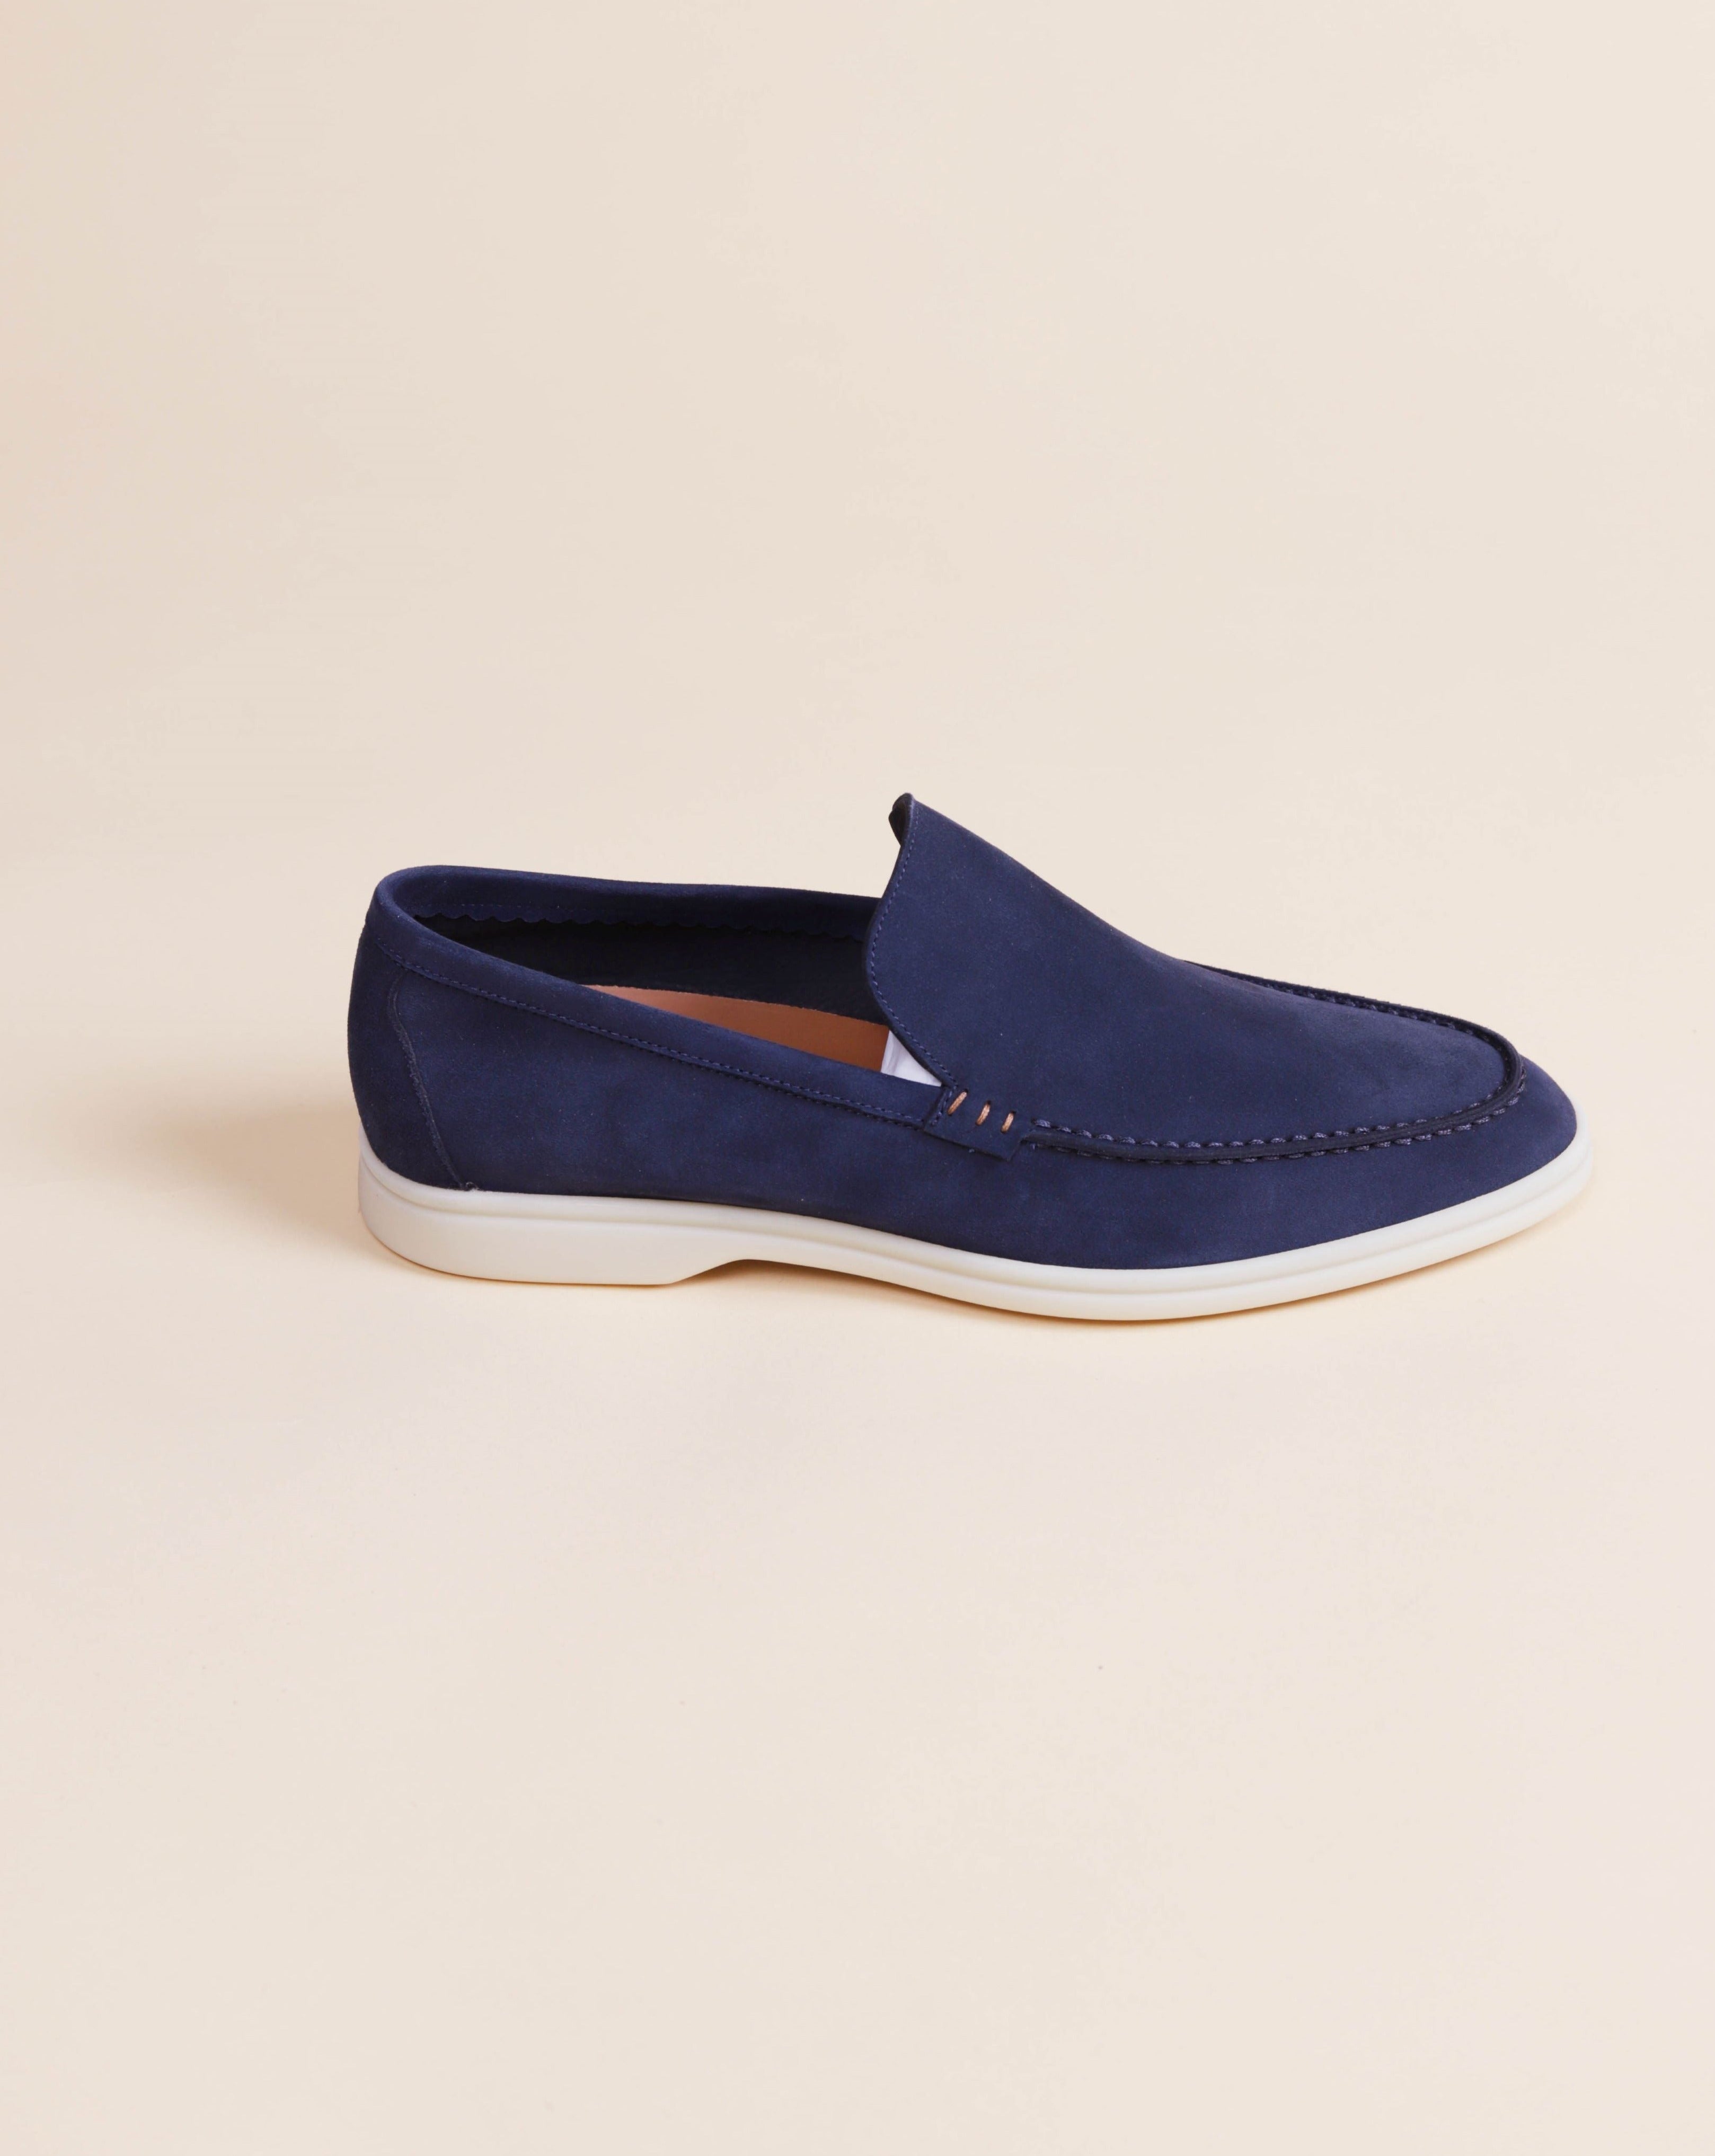 PS LOAFER SUEDE BLUE